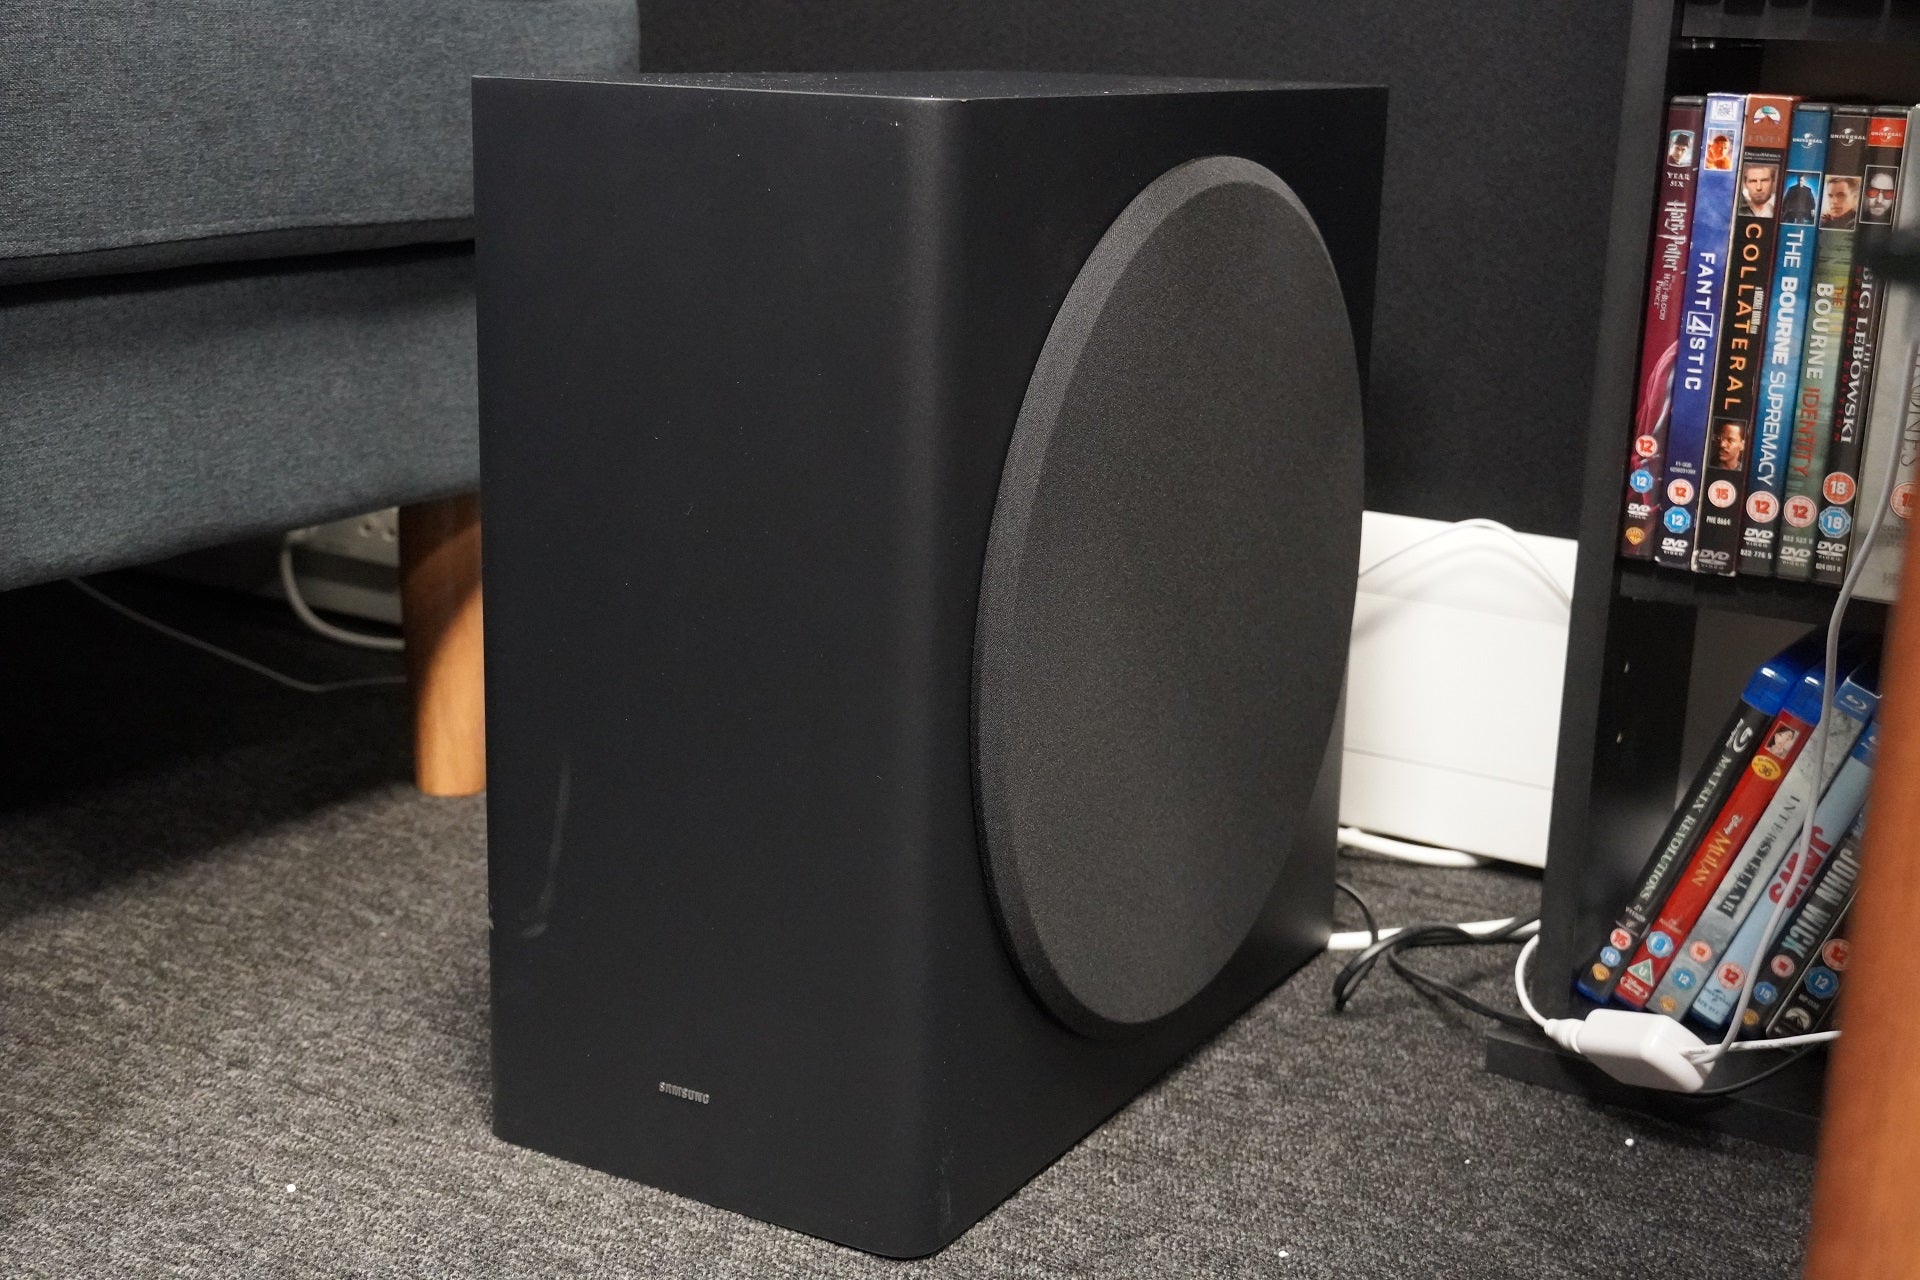 Snazzy Volg ons ornament Samsung HW-Q800B Review: Firing from all speakers